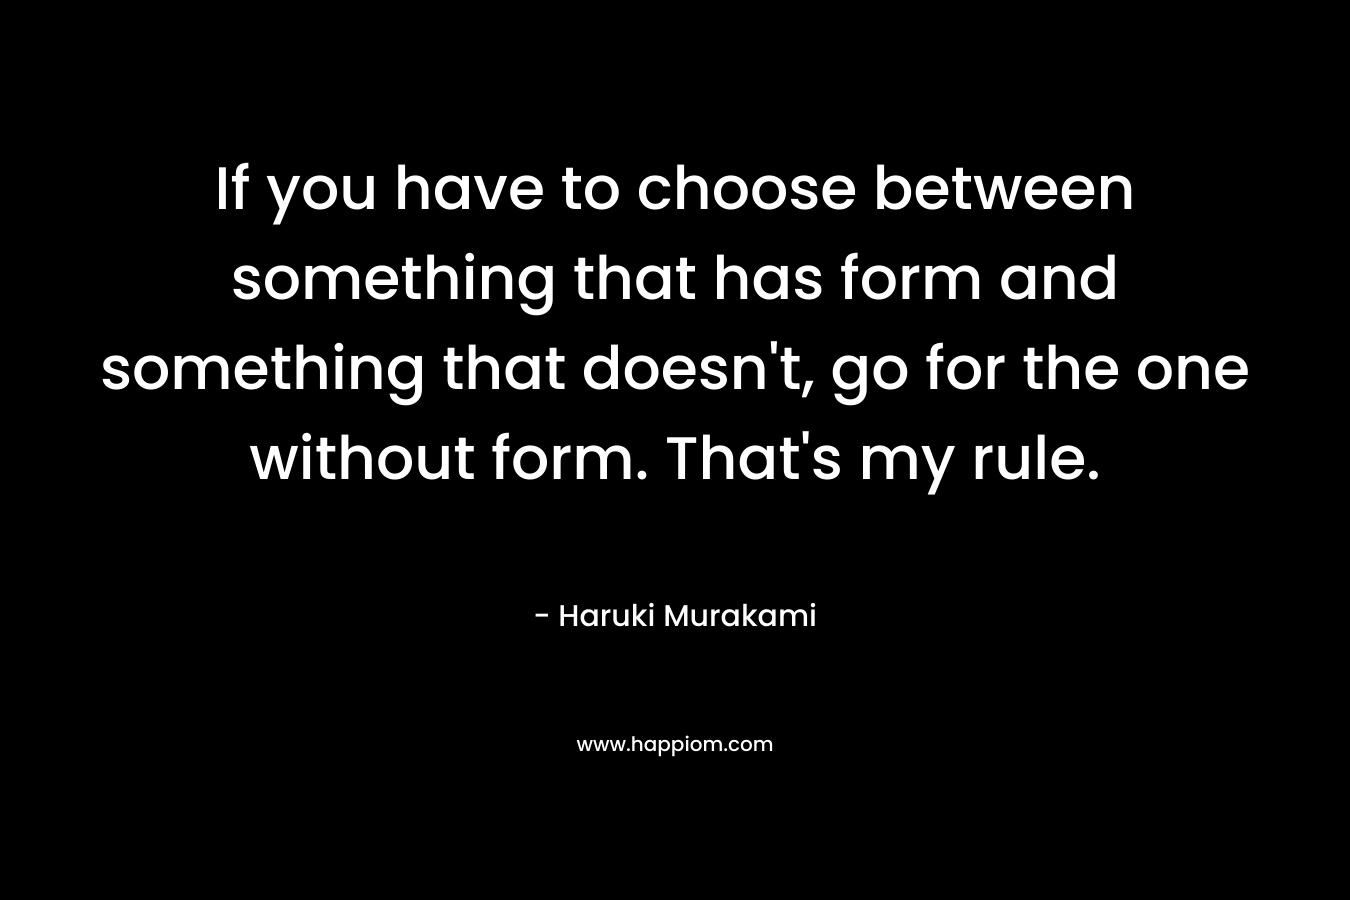 If you have to choose between something that has form and something that doesn't, go for the one without form. That's my rule.